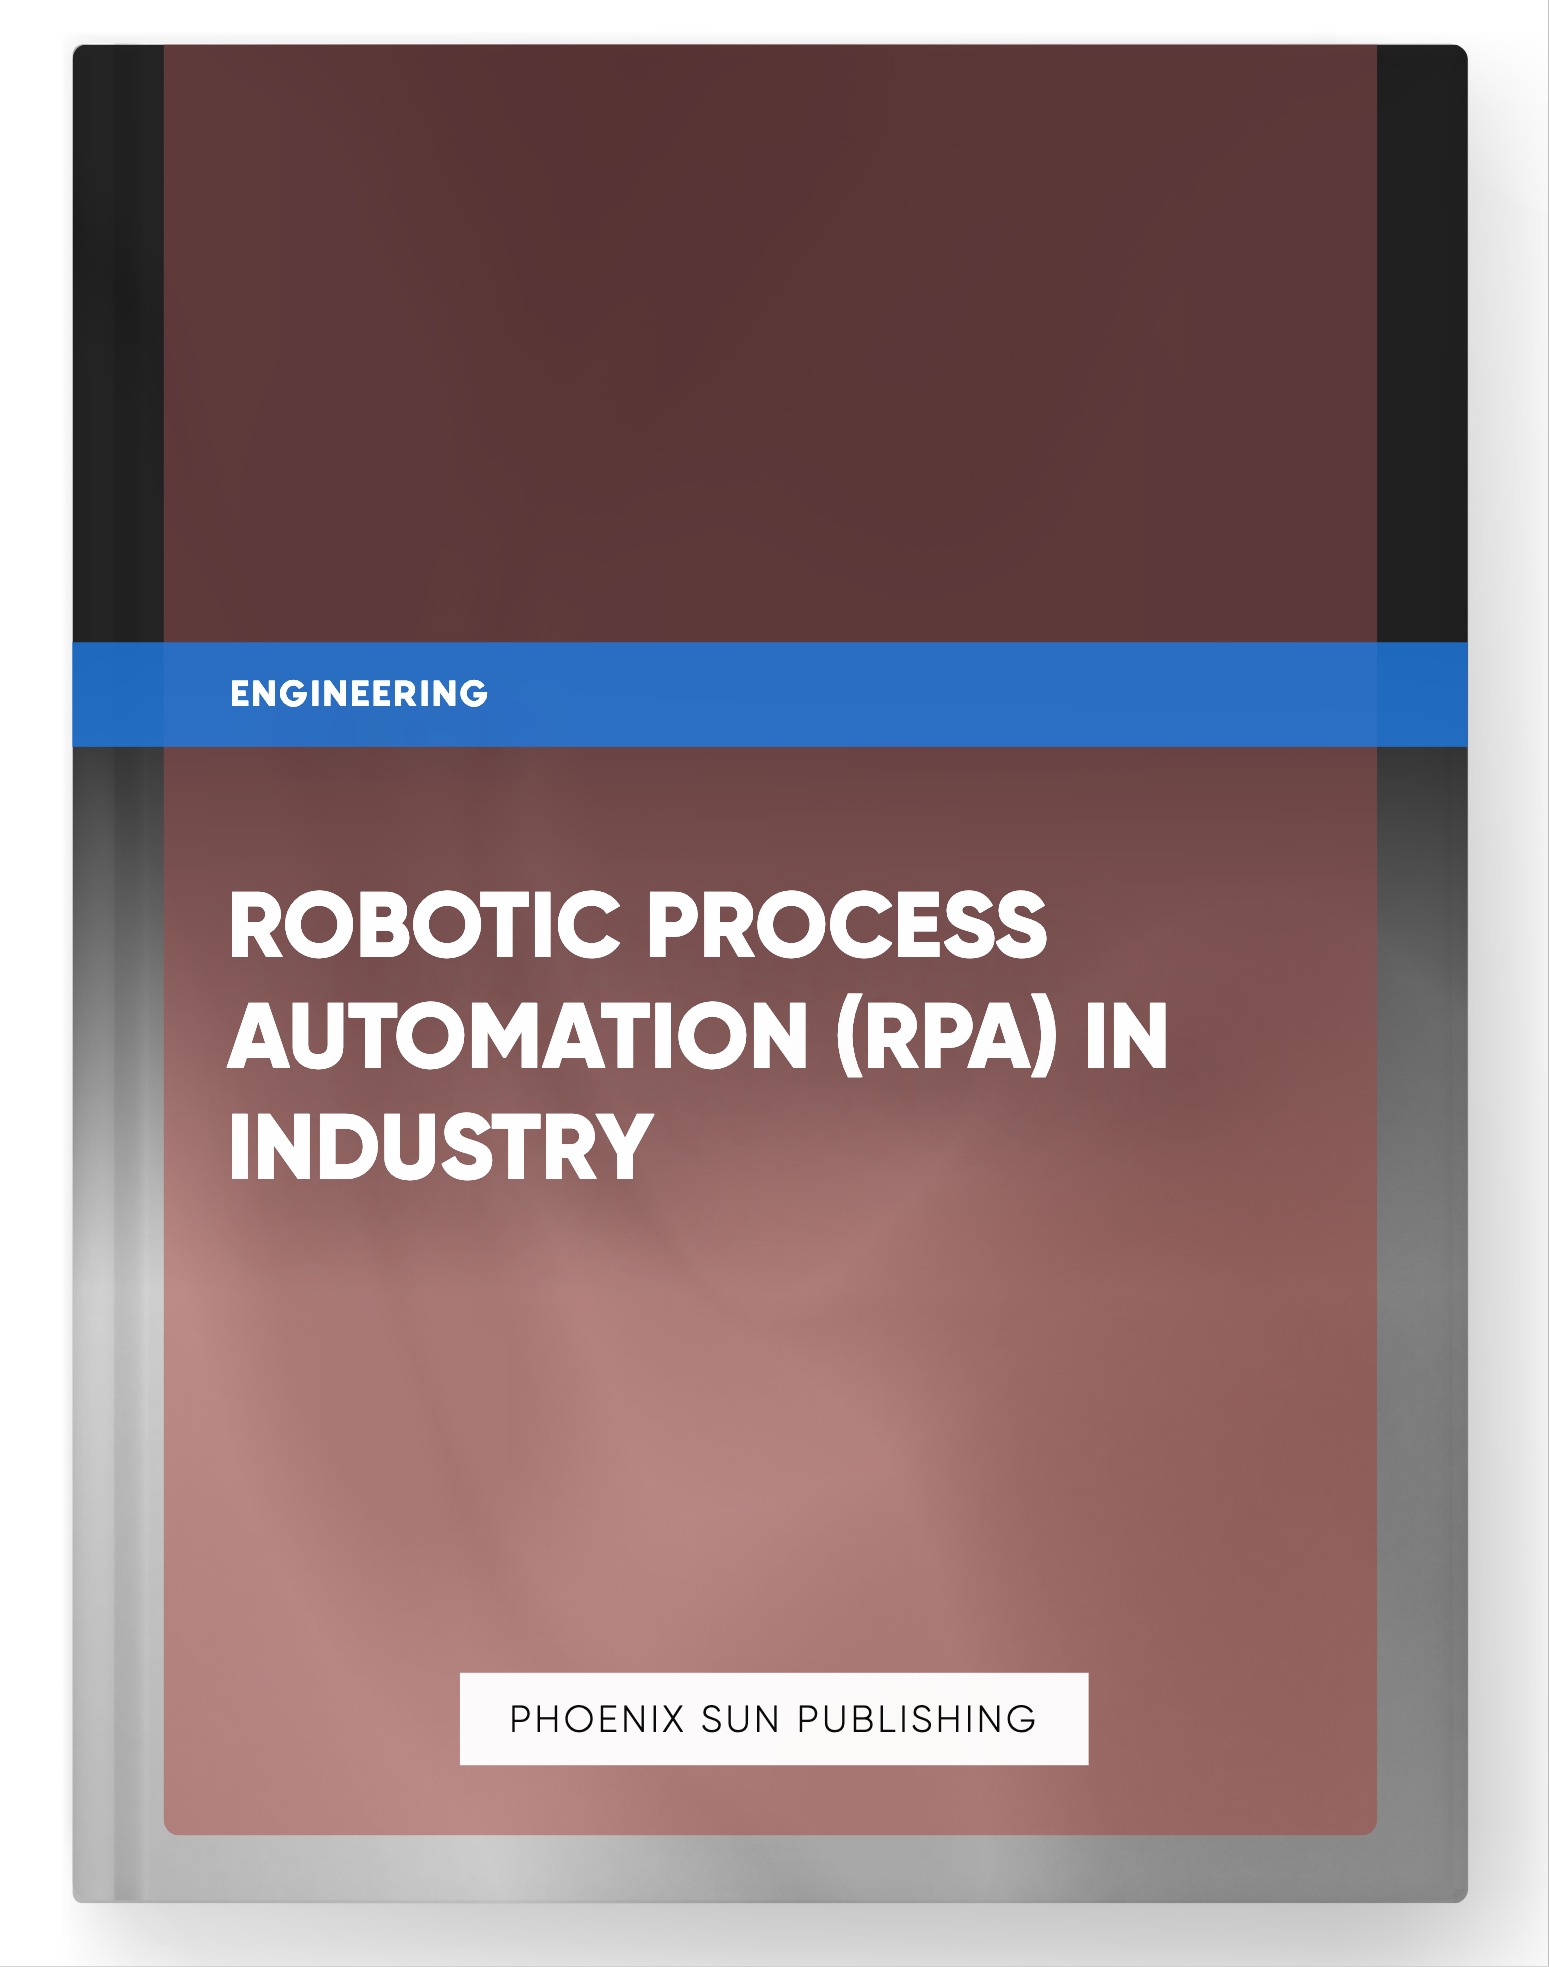 Robotic Process Automation (RPA) in Industry